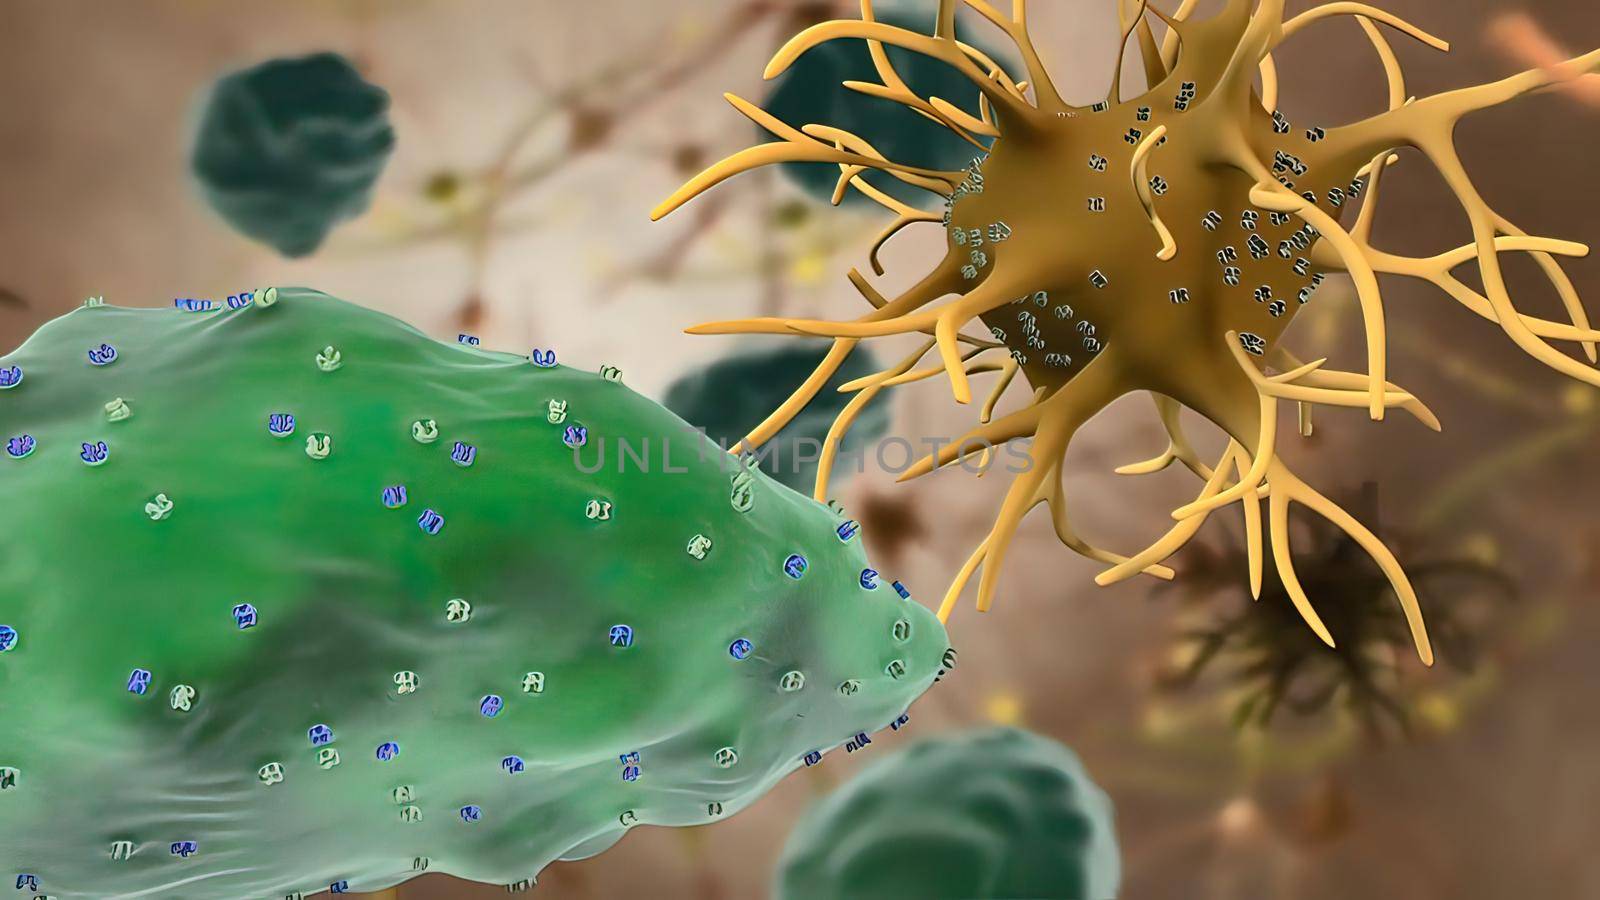 Microglia and macrophages of the central nervous system.The contribution of microglia priming and systemic inflammation to chronic neurodegeneration 3D illustration